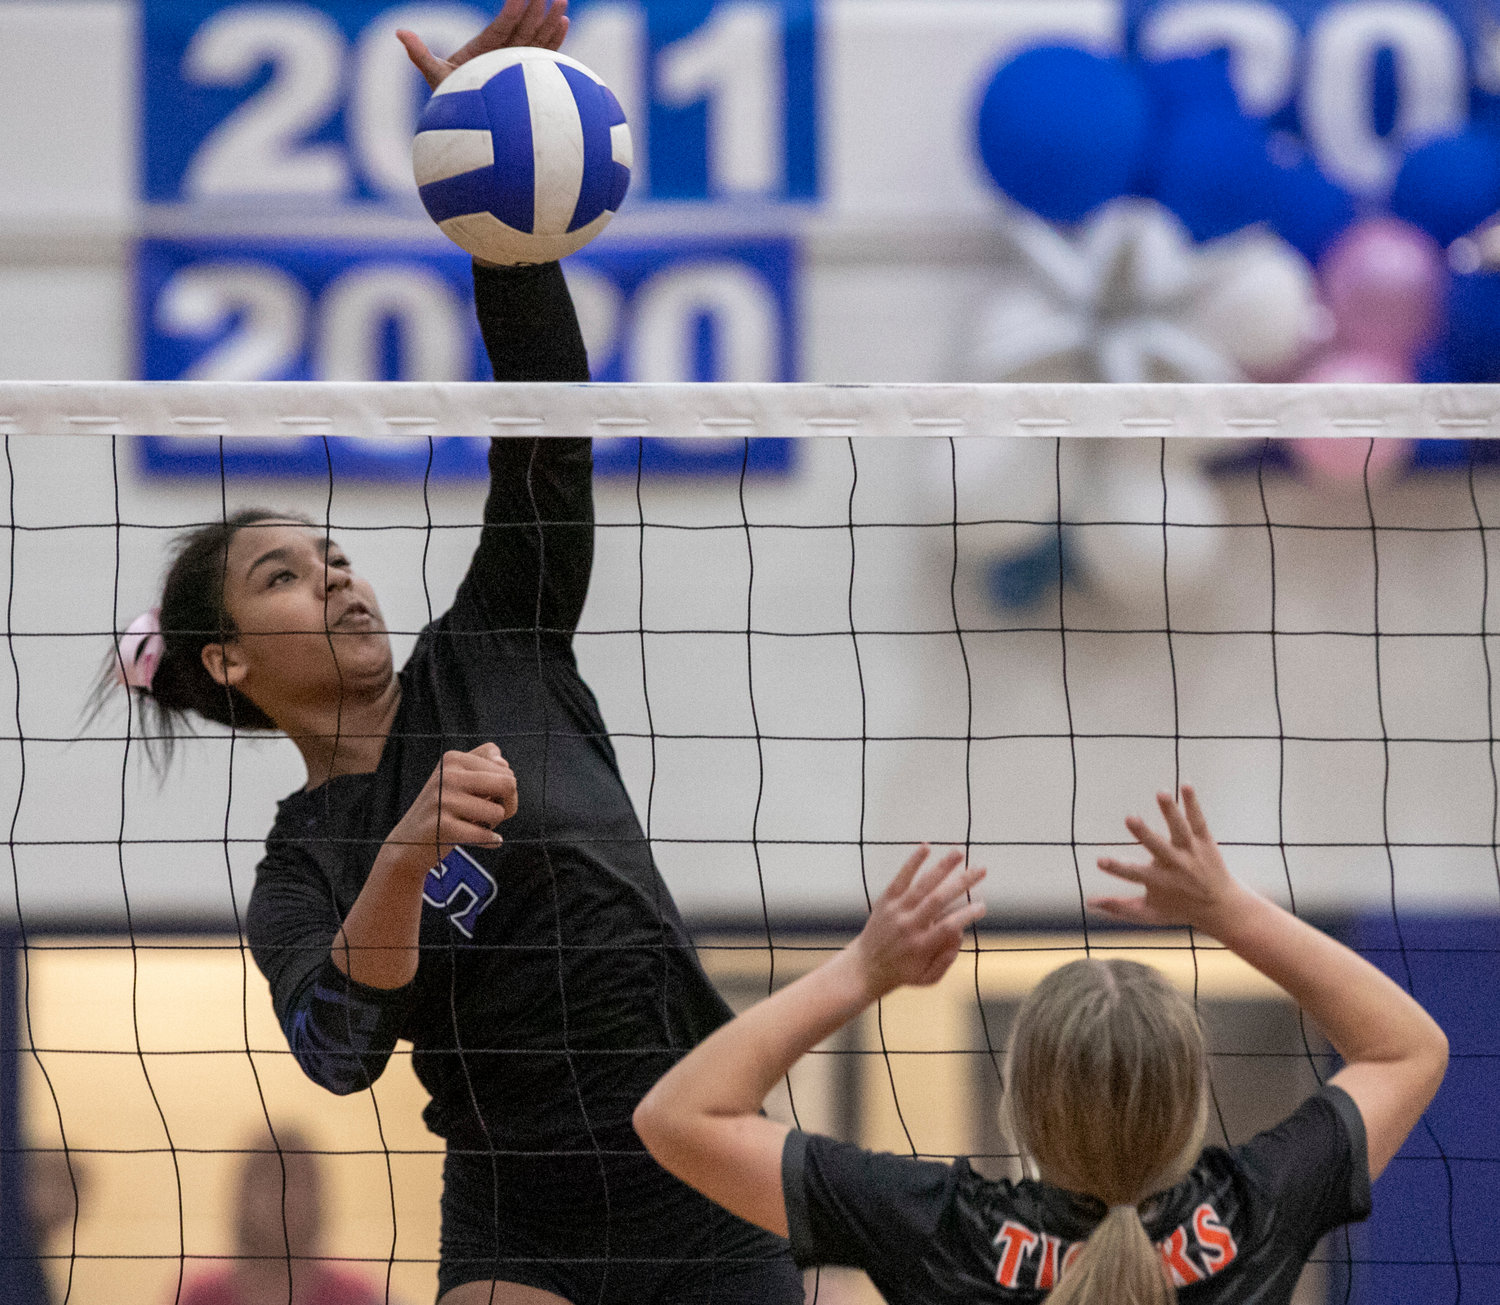 Bayside Academy freshman Haley Robinson spikes an attack at the net during the Admirals’ Class 6A Area 2 Tournament contest against the Baldwin County Tigers Oct. 13 in Daphne. The outside hitter was named to MaxPreps’ Underclass All-America team as a second-team hitter.